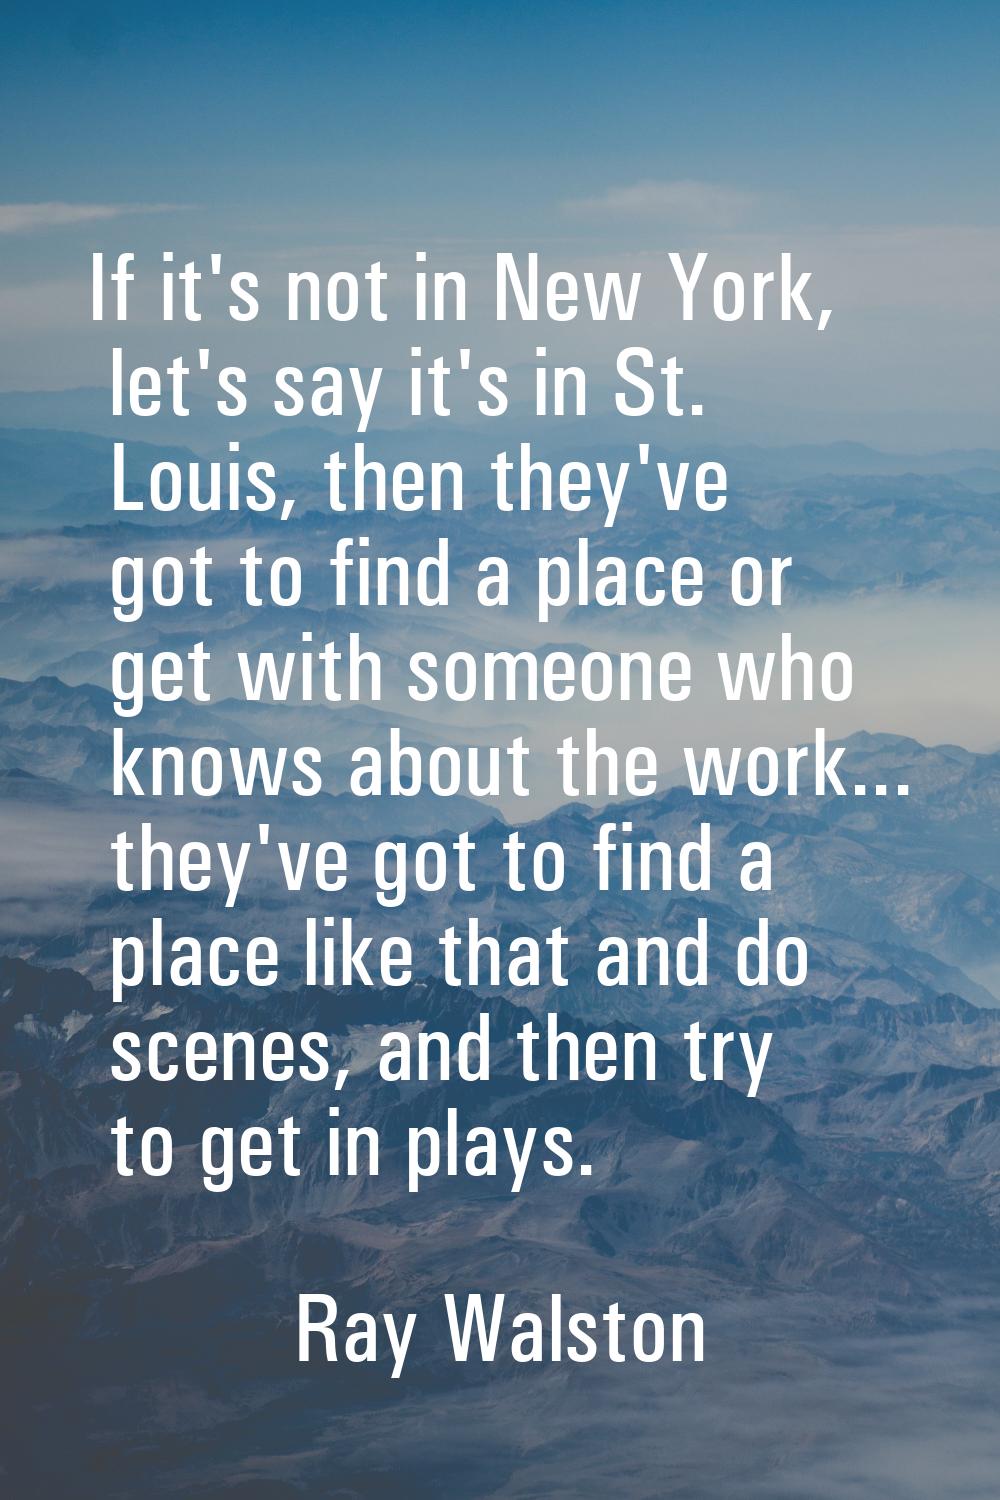 If it's not in New York, let's say it's in St. Louis, then they've got to find a place or get with 